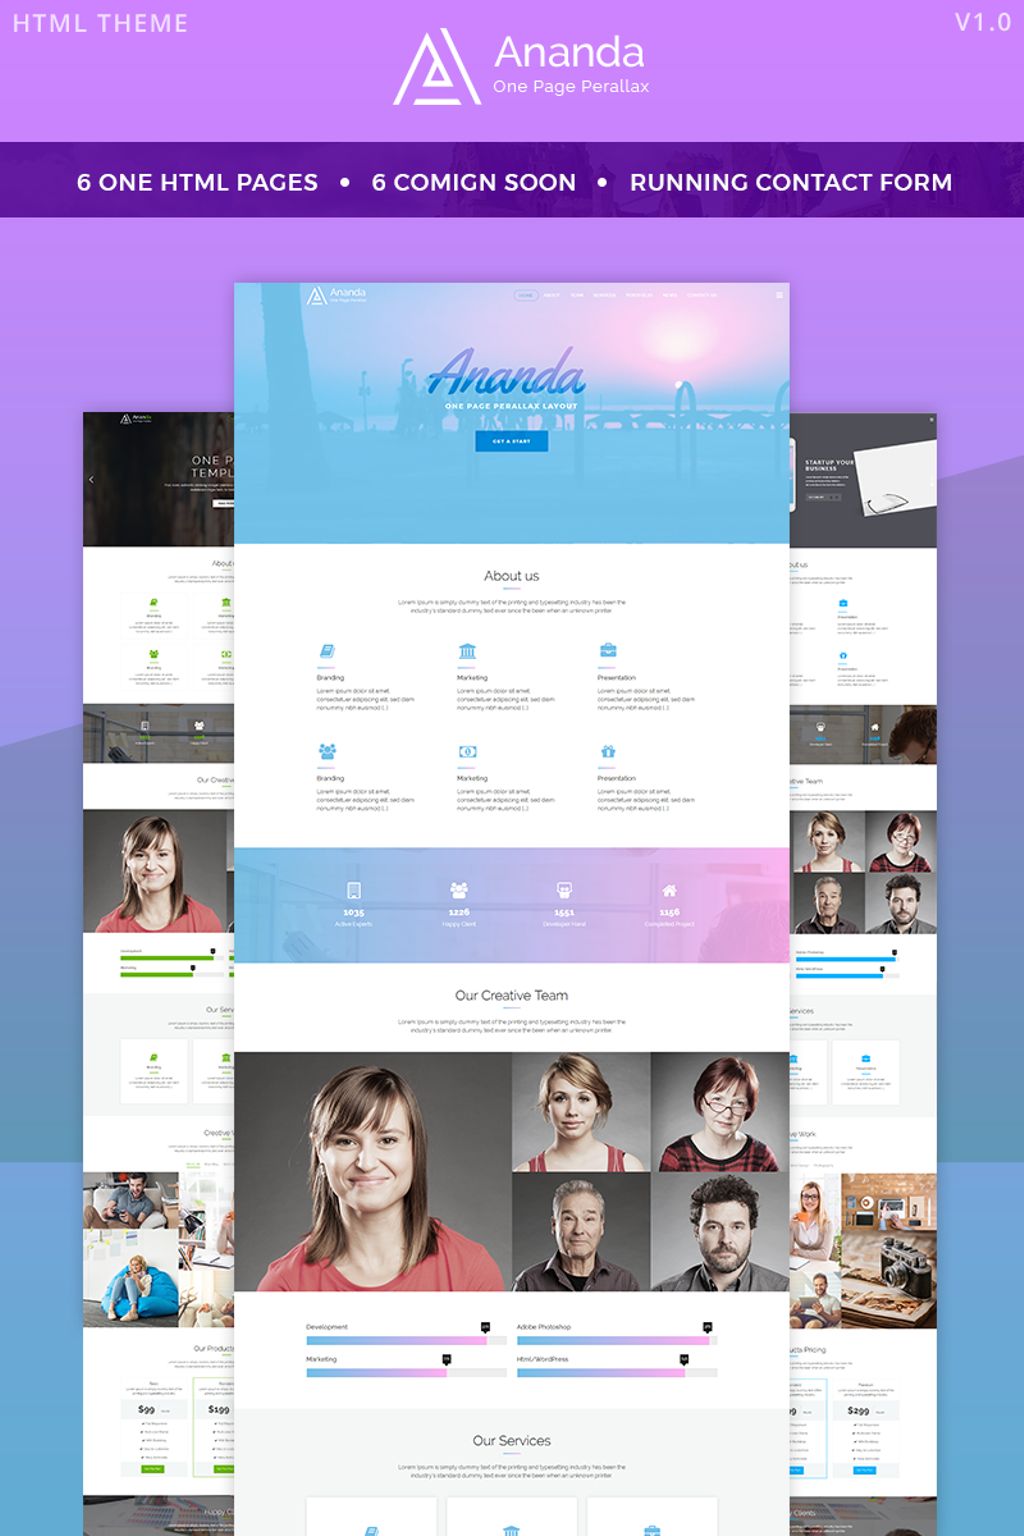  Ananda - One Page Parallax Website Template